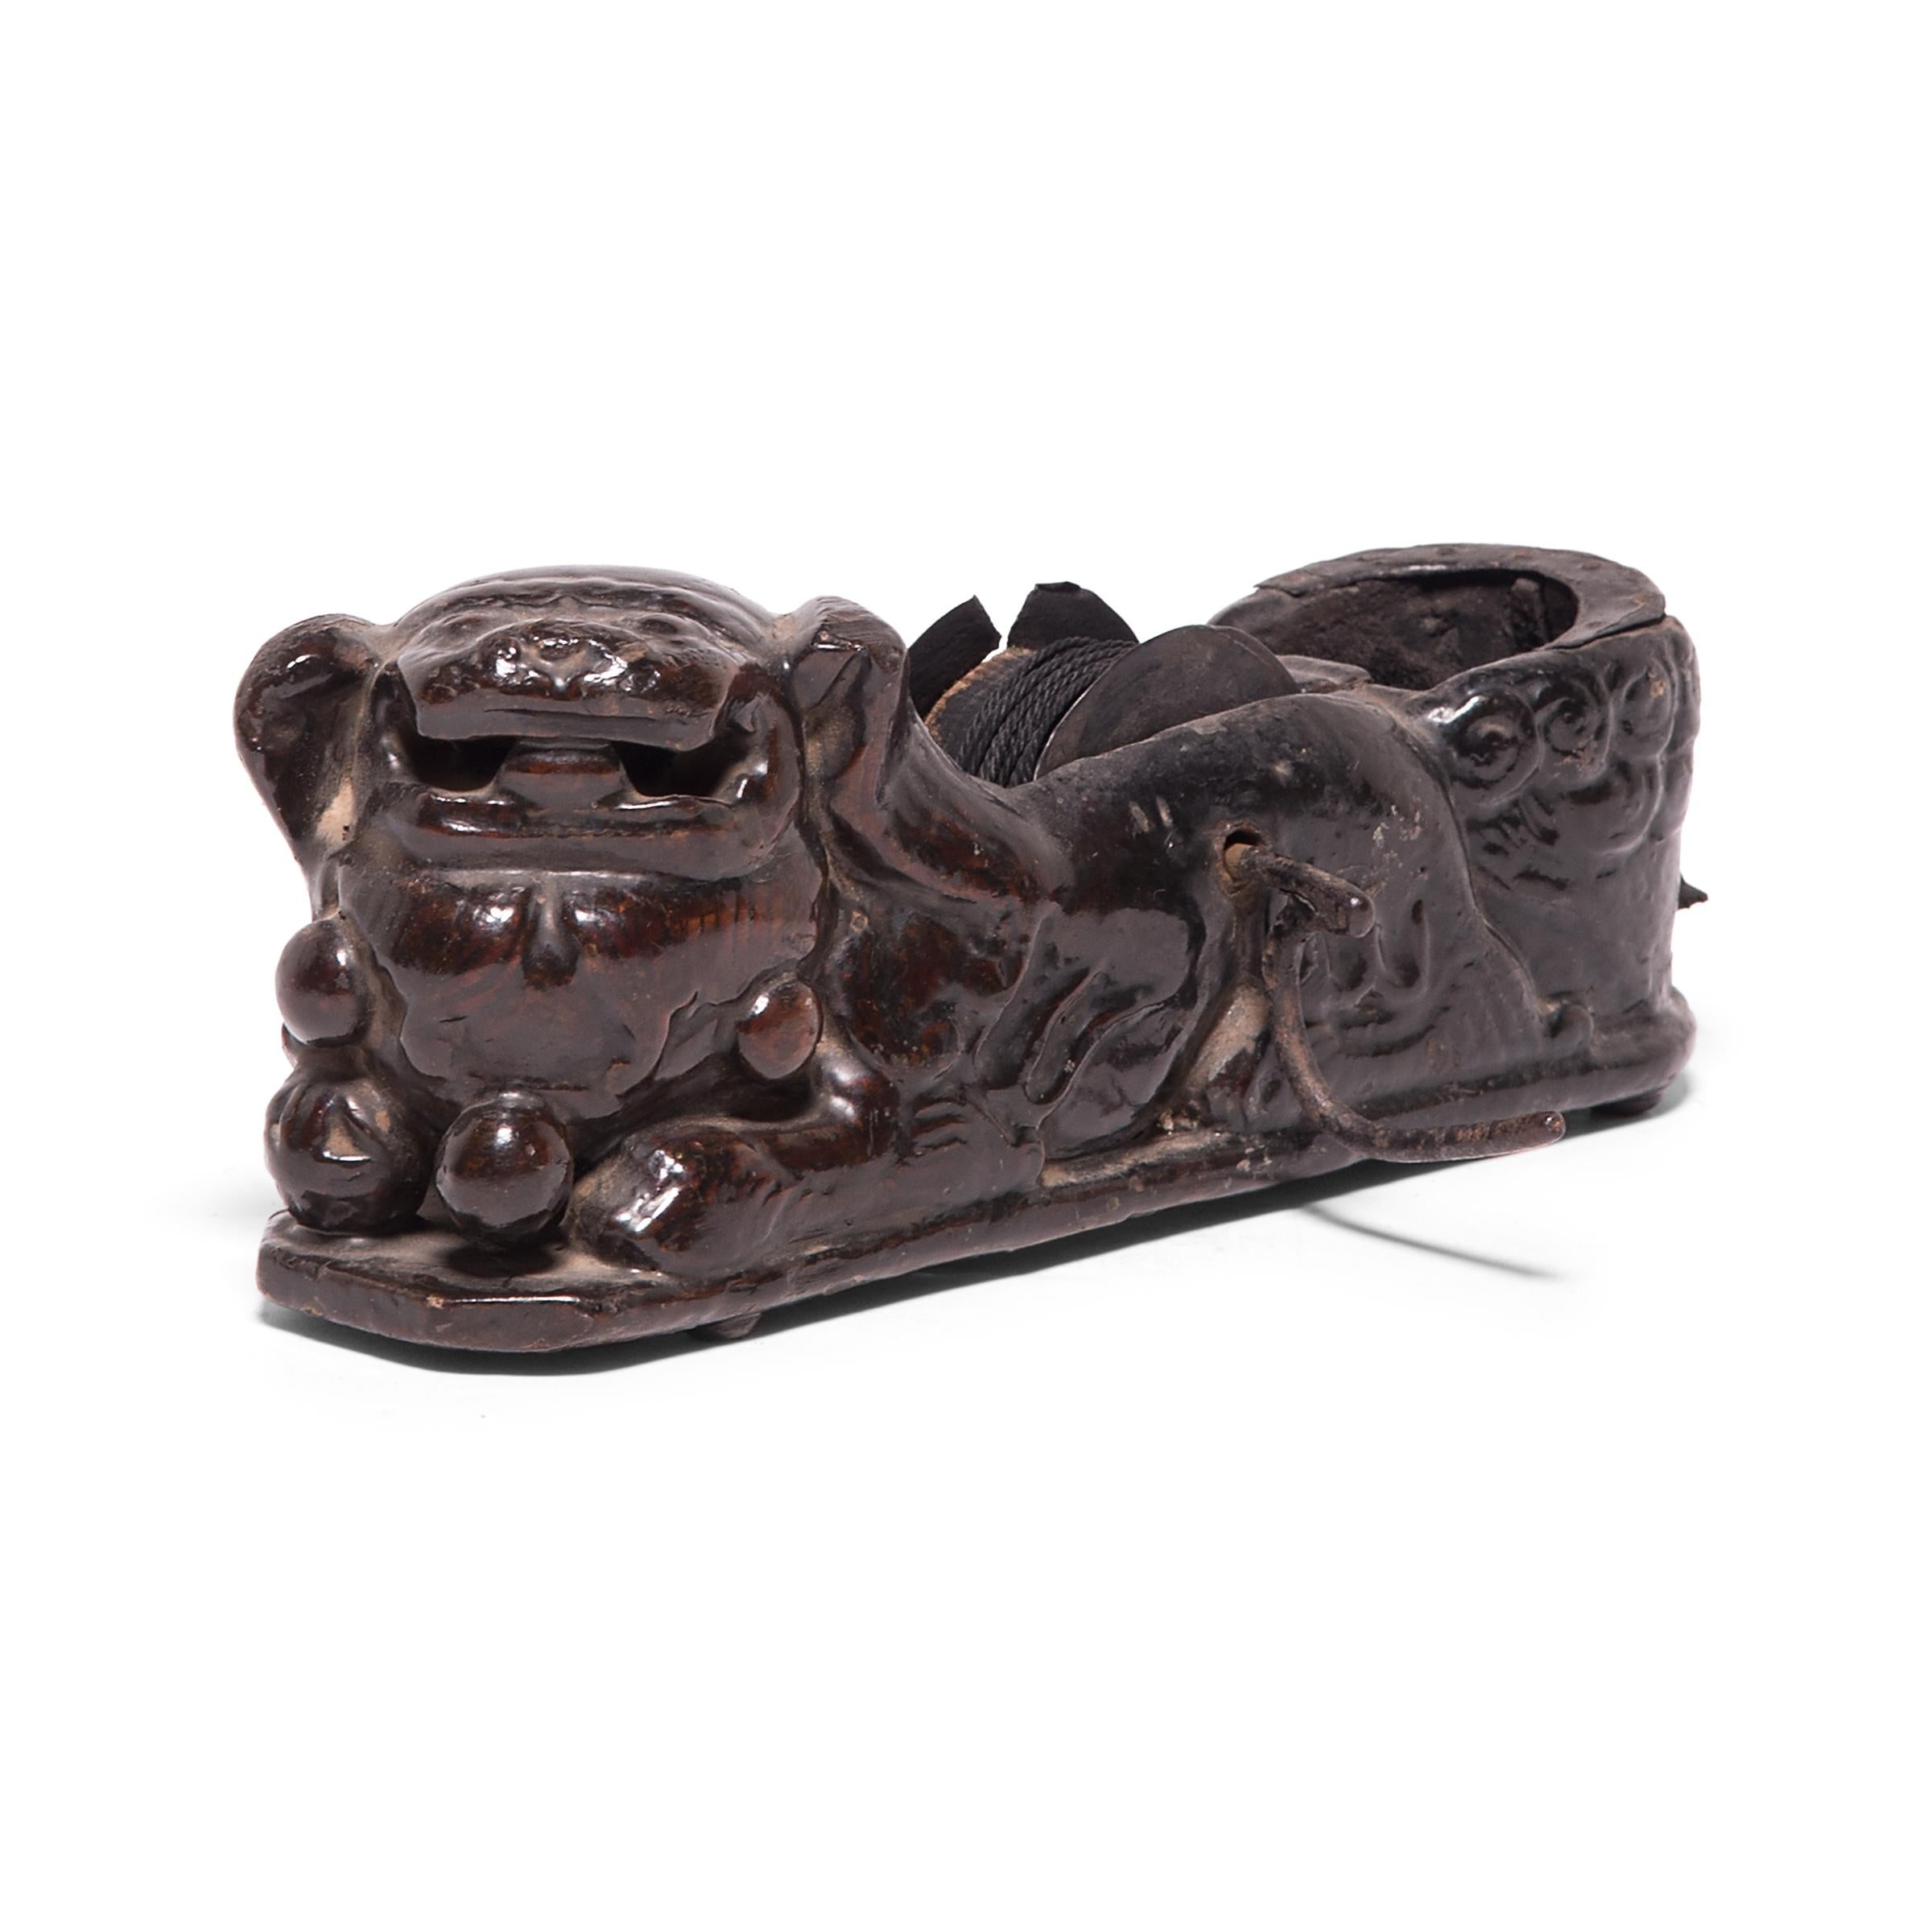 Given the beauty and thoughtful design of traditional Chinese furniture, it’s no wonder that Qing-dynasty carpenter’s tools were accorded the same attention to detail. This remarkably intact 19th century inkline reel is carved to depict a guardian